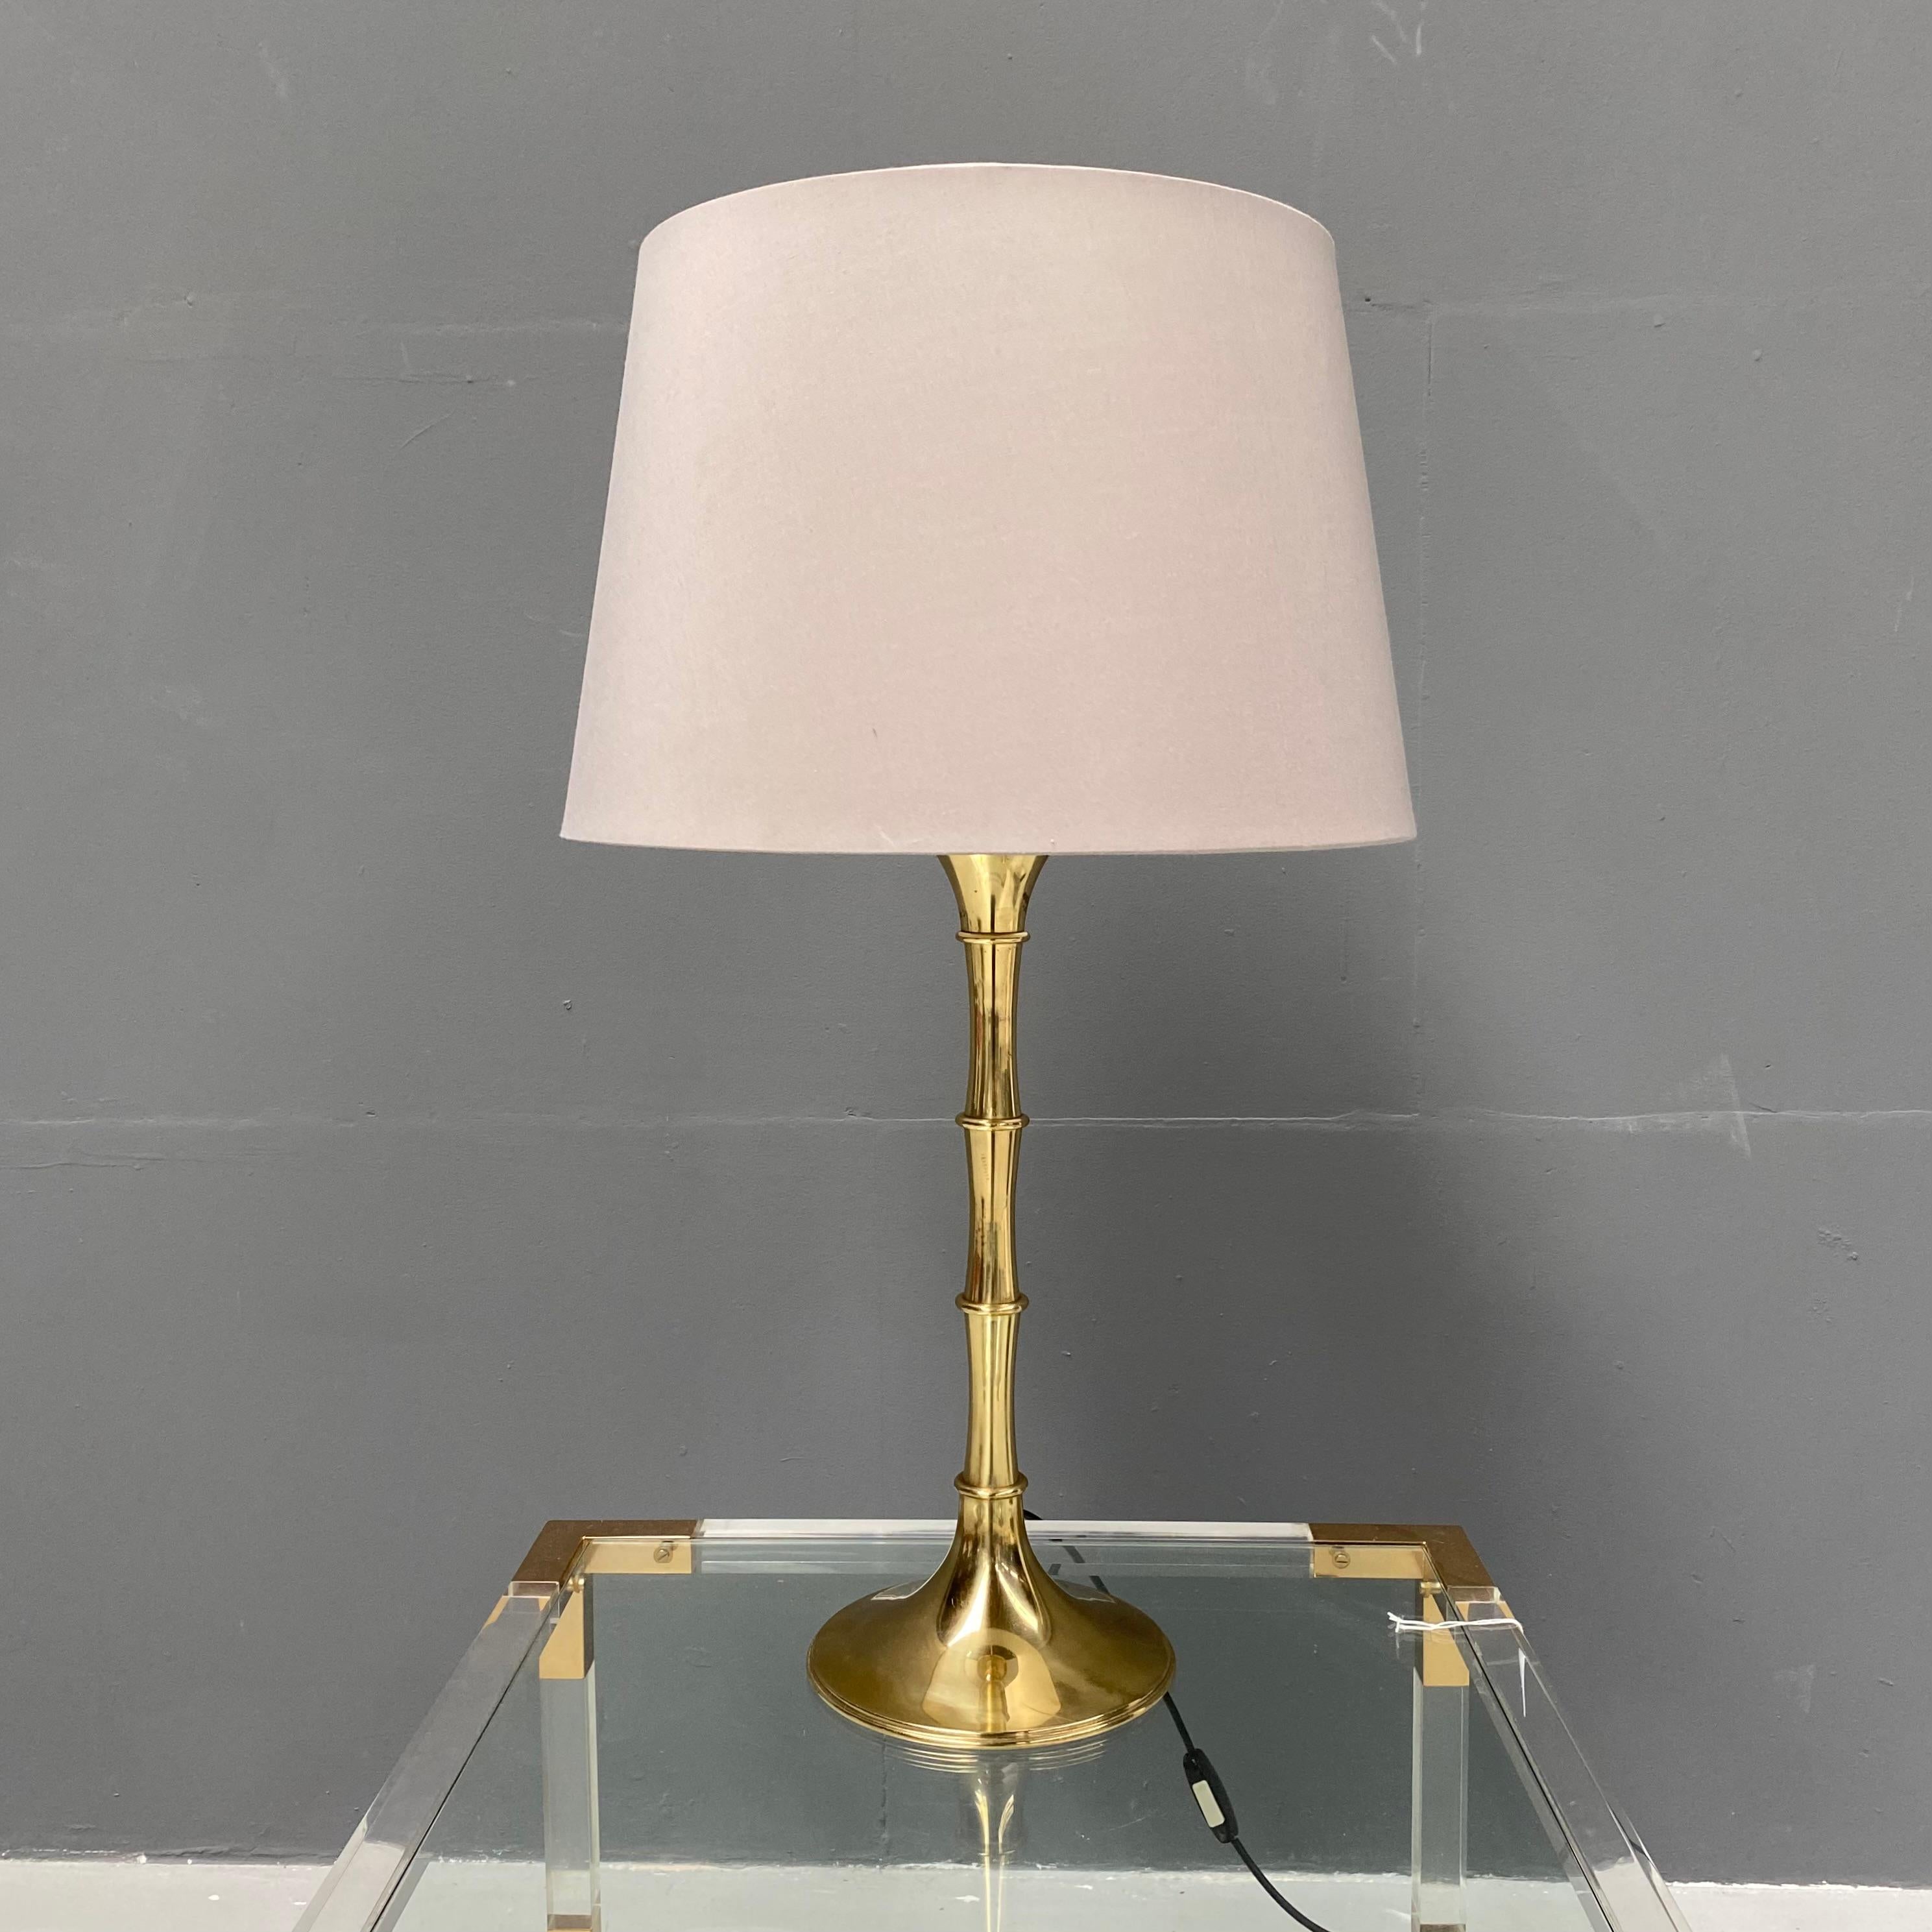 Vintage Bamboo Table Lamp in Brass by Ingo Maurer for M Design, 1960s. For Sale 5